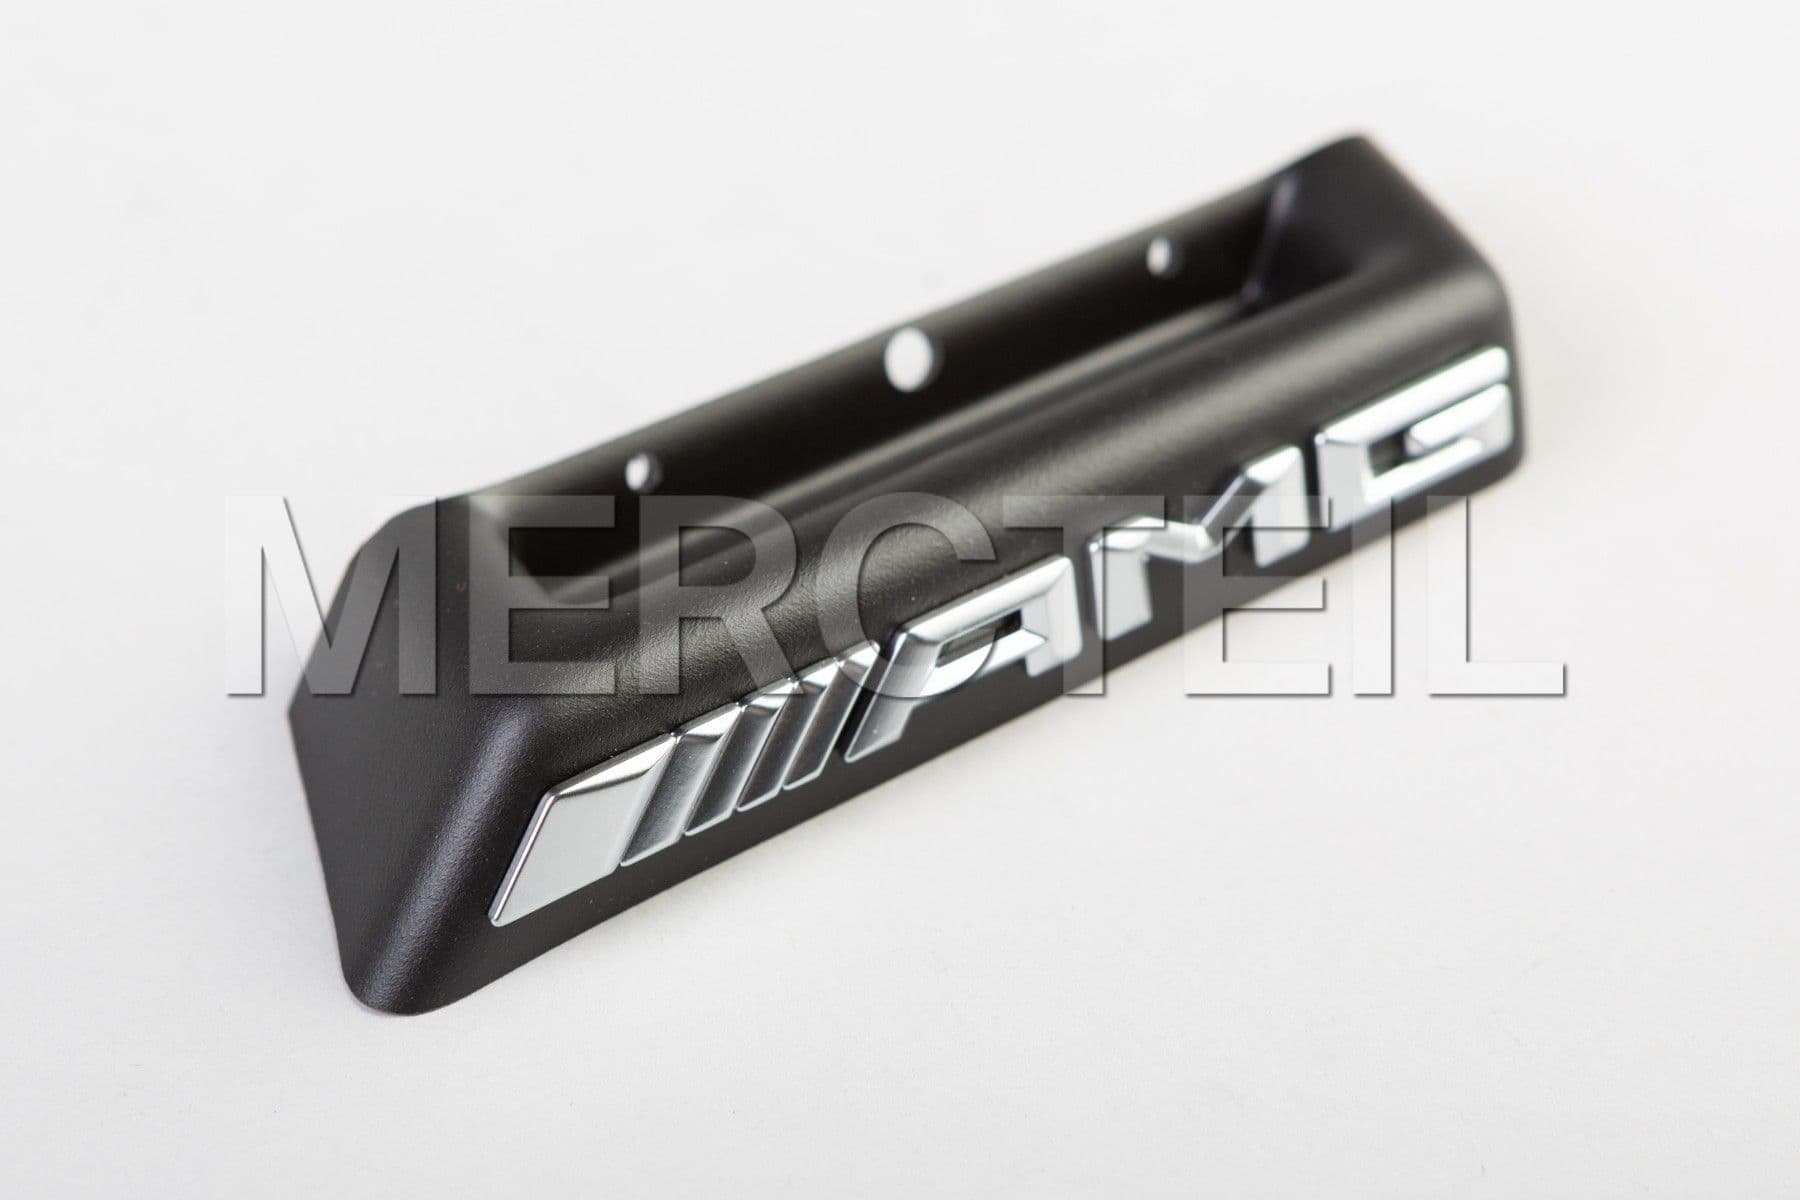 E63 AMG Badge for Radiator Grille for E-Class (part number: 	
A2128170700)